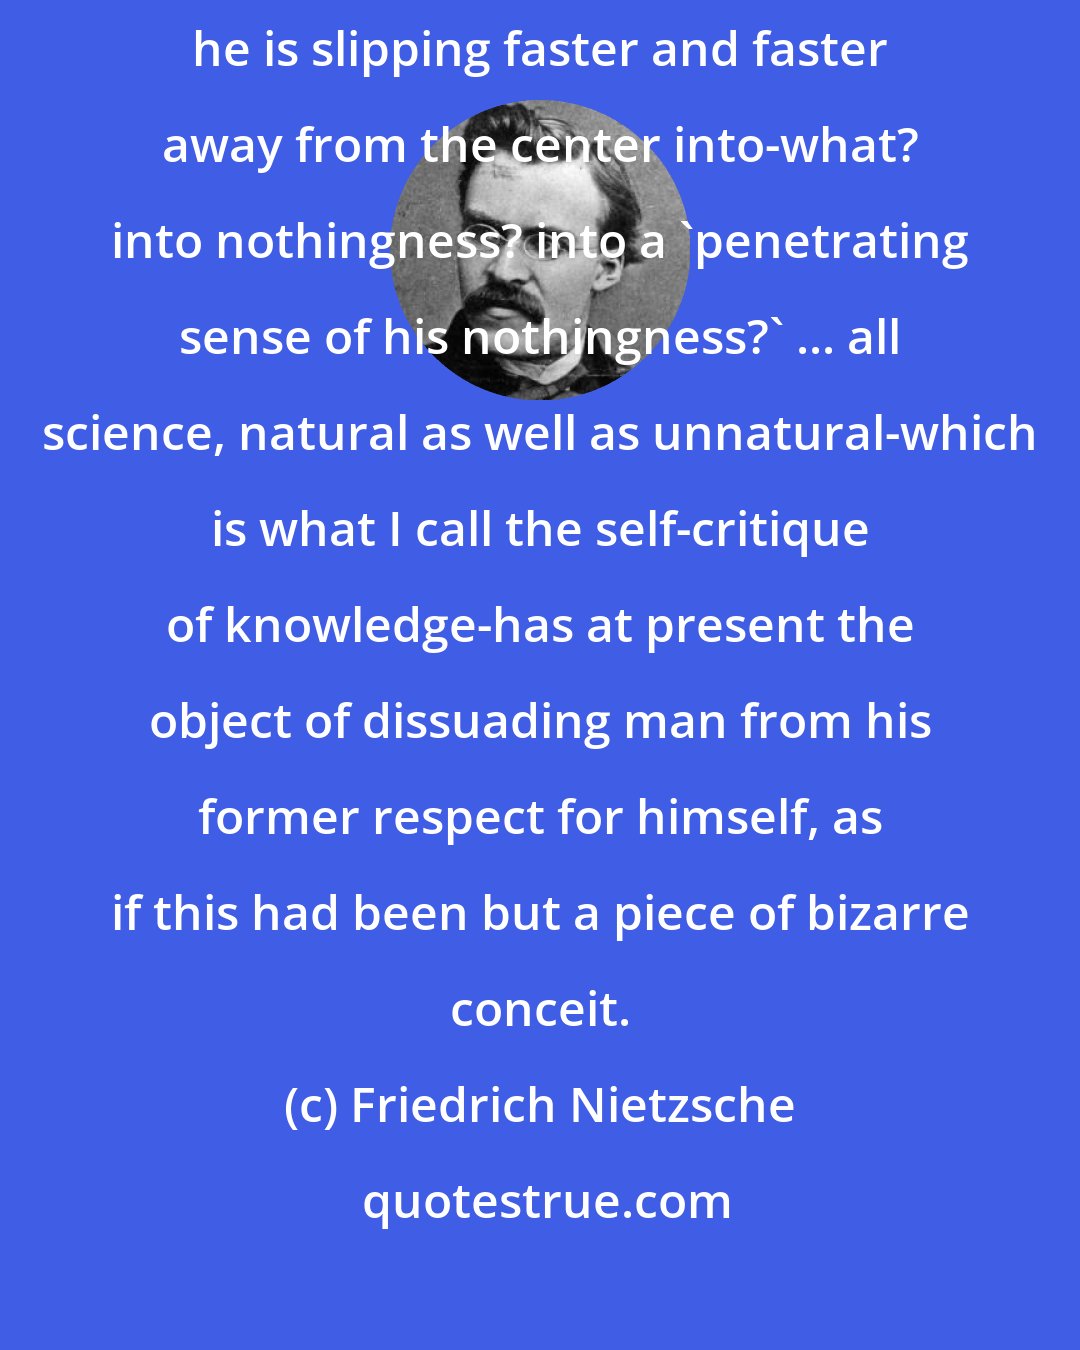 Friedrich Nietzsche: Since Copernicus, man seems to have got himself on an inclined plane-now he is slipping faster and faster away from the center into-what? into nothingness? into a 'penetrating sense of his nothingness?' ... all science, natural as well as unnatural-which is what I call the self-critique of knowledge-has at present the object of dissuading man from his former respect for himself, as if this had been but a piece of bizarre conceit.